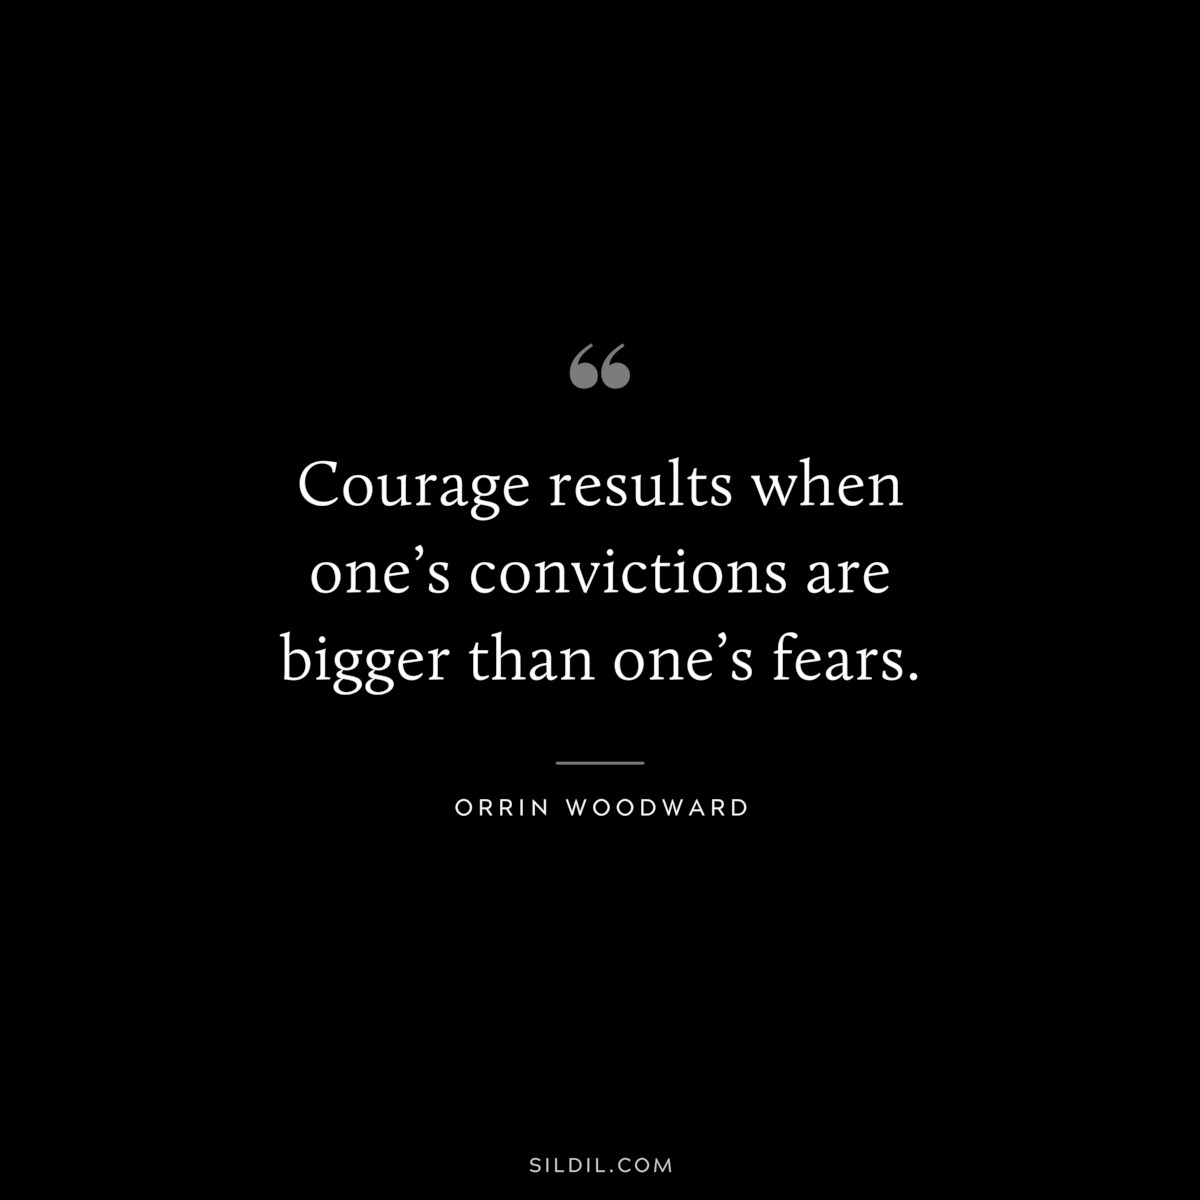 Courage results when one’s convictions are bigger than one’s fears. ― Orrin Woodward